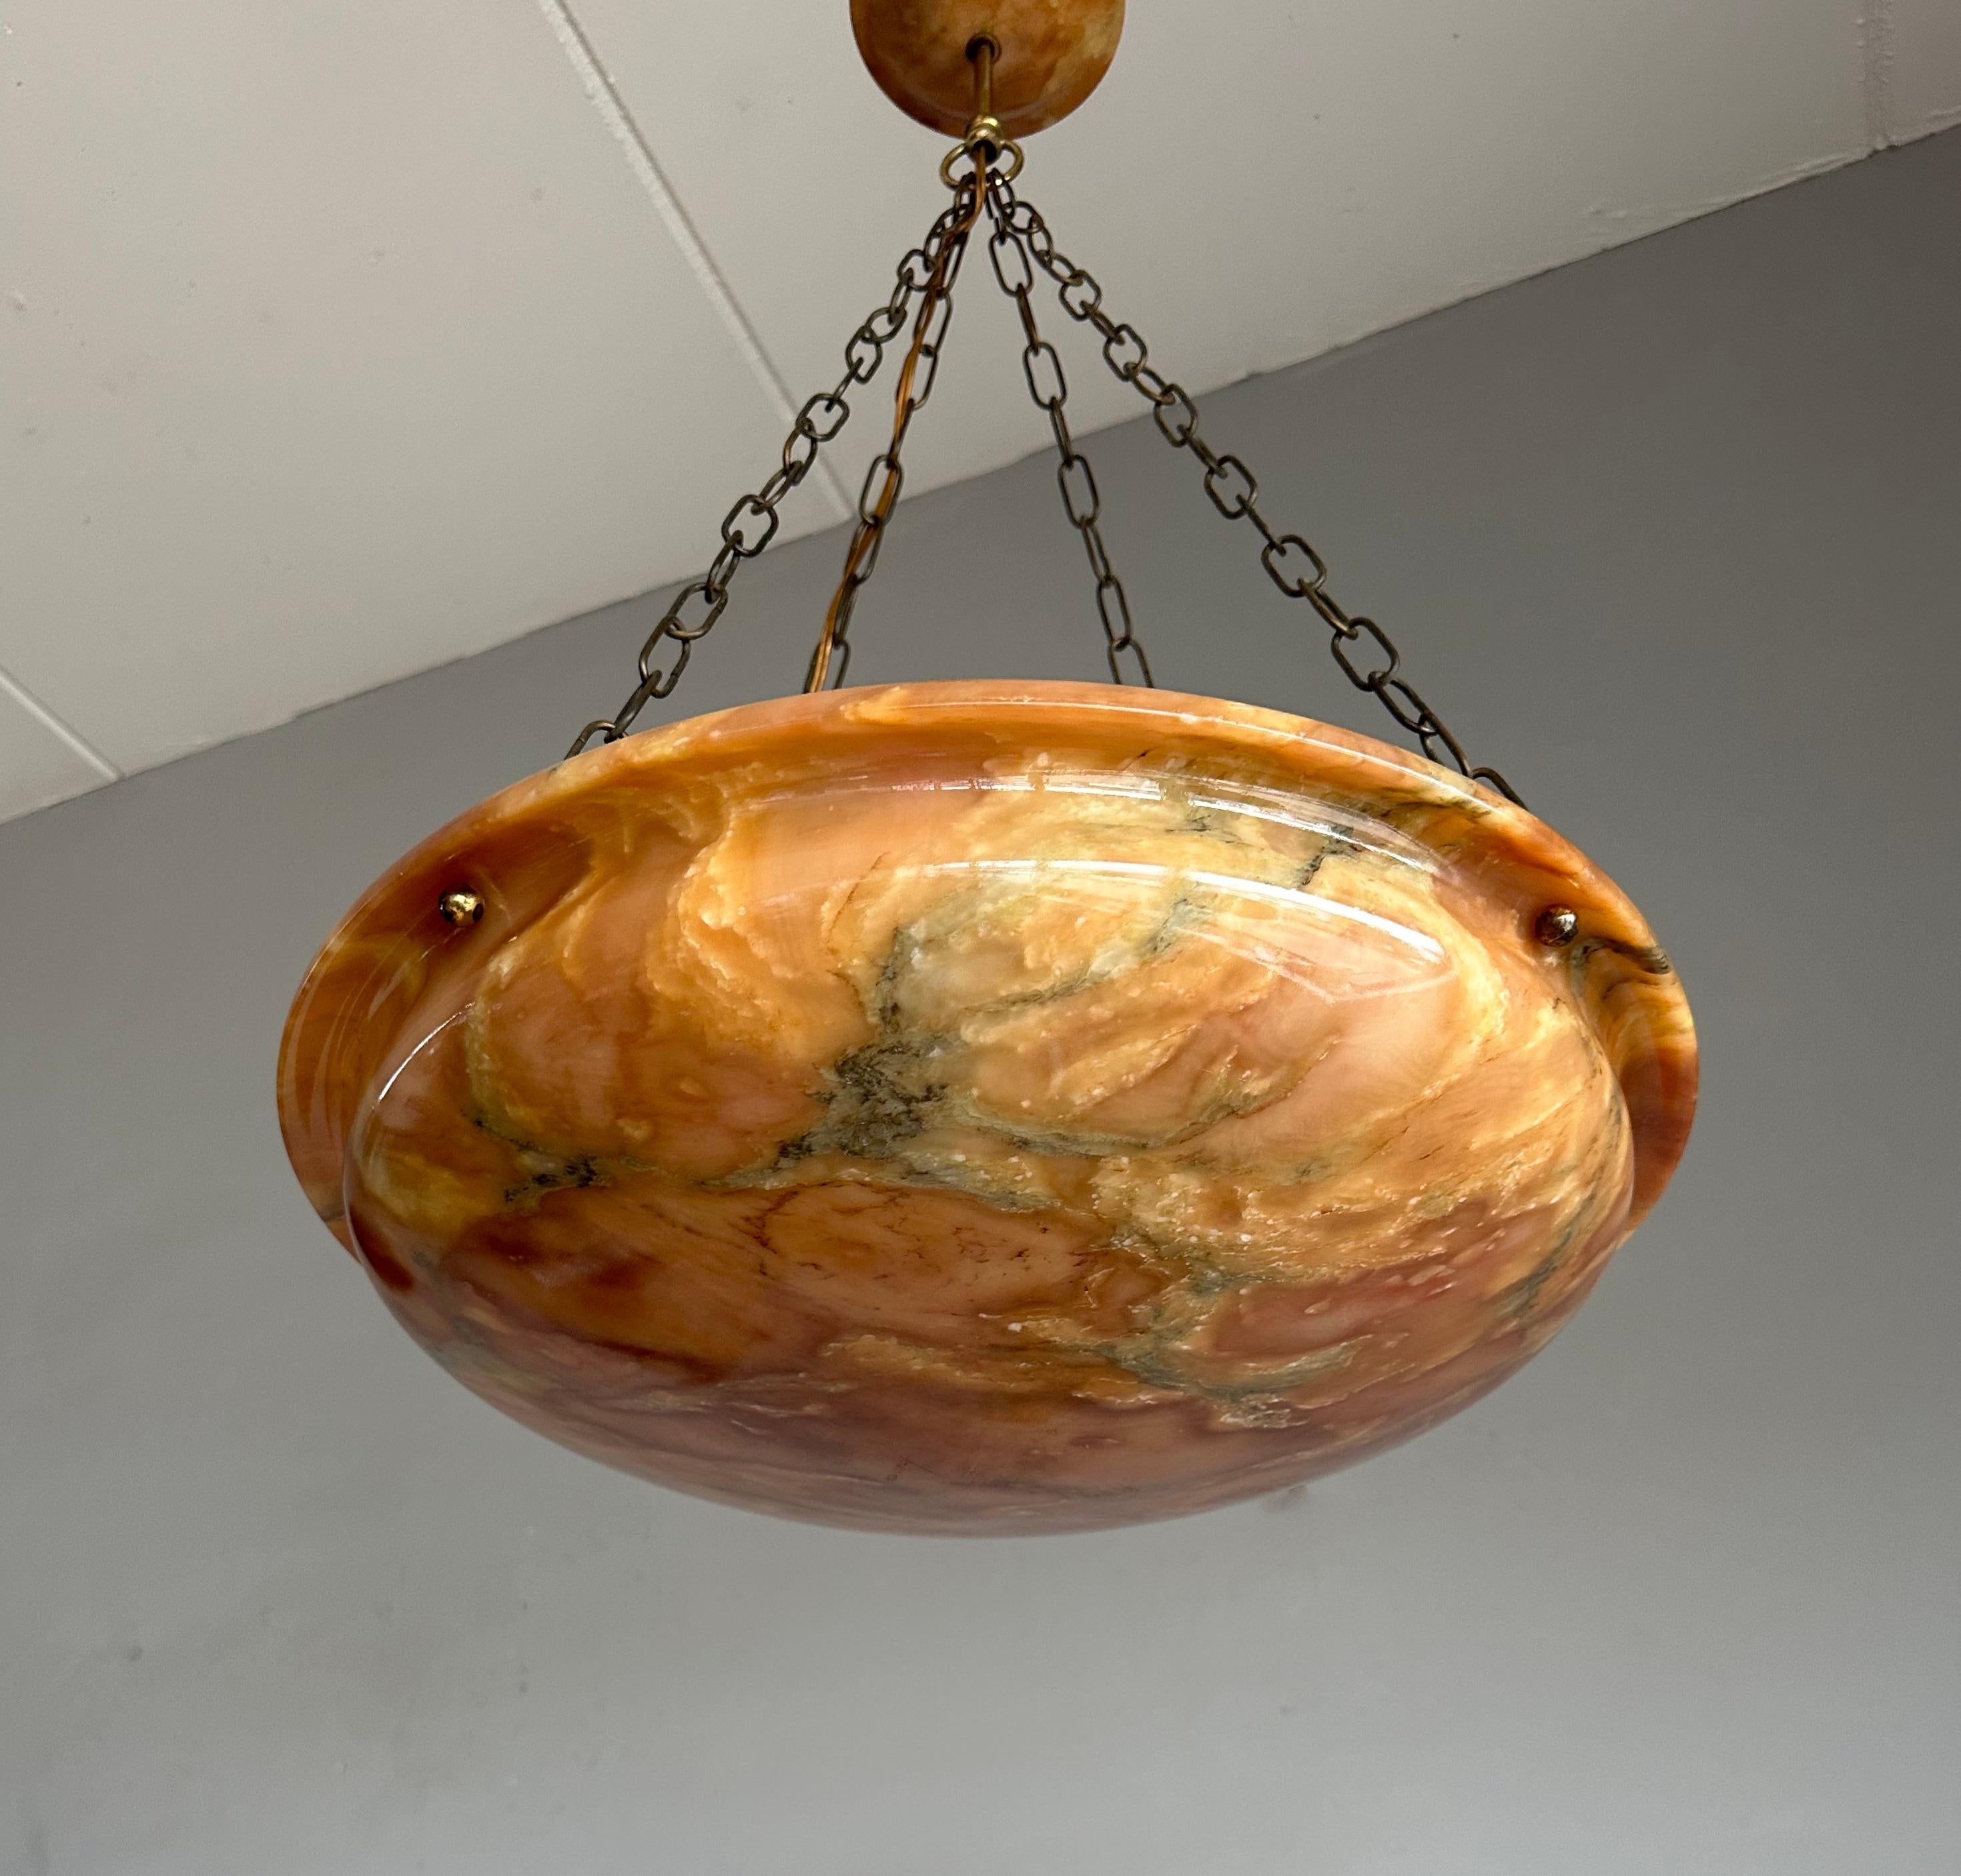 Striking Antique and Mint Condition, Large Alabaster Pendant Light / Fixture For Sale 2